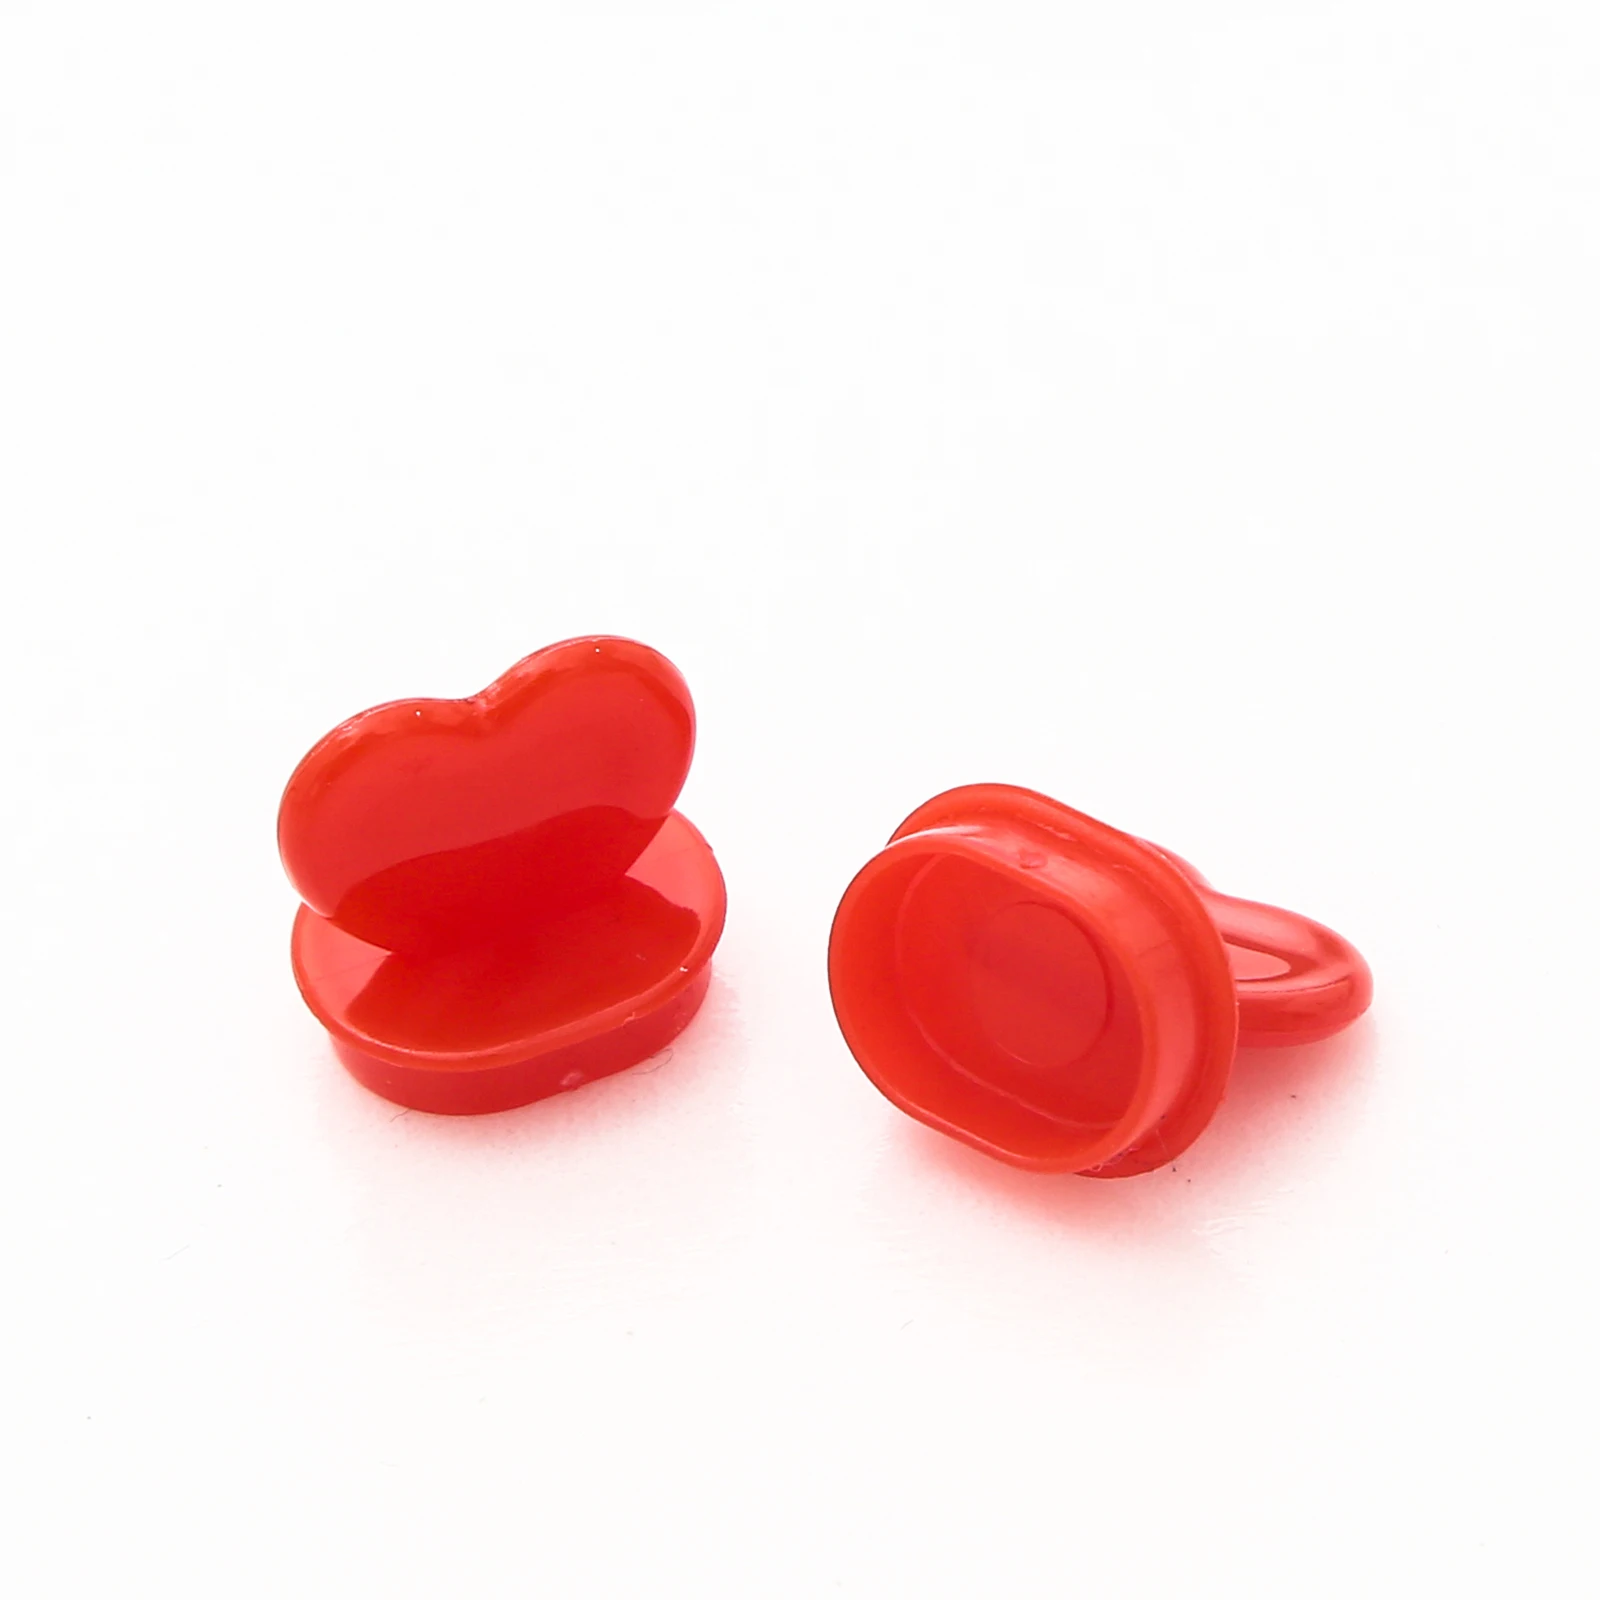 Beverage Plug Red Heart Shaped Stopper Plug for Disposable Lids Perfect for Coffee Shops Milk Tea Restaurant Takeout 100pcs 